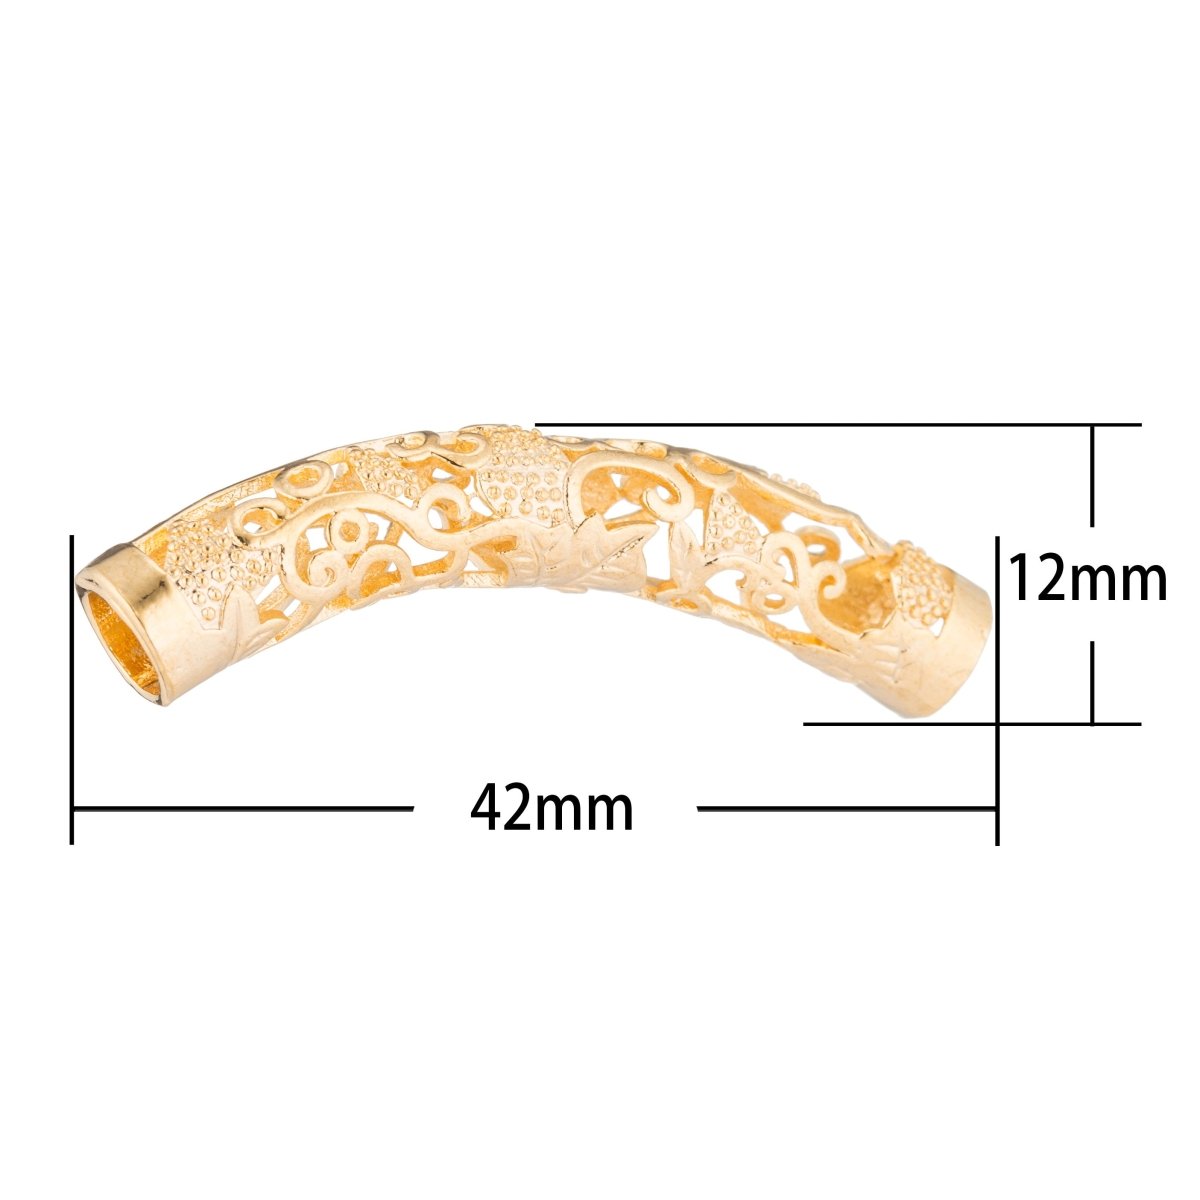 1pc Gold Filled Bar, Dainty, Intricate, Swirl, Bead Making, Charm Connector, Gift, Bracelet Charm Bead Finding Connector for Jewelry Making, BDGF-76/M-76 - DLUXCA